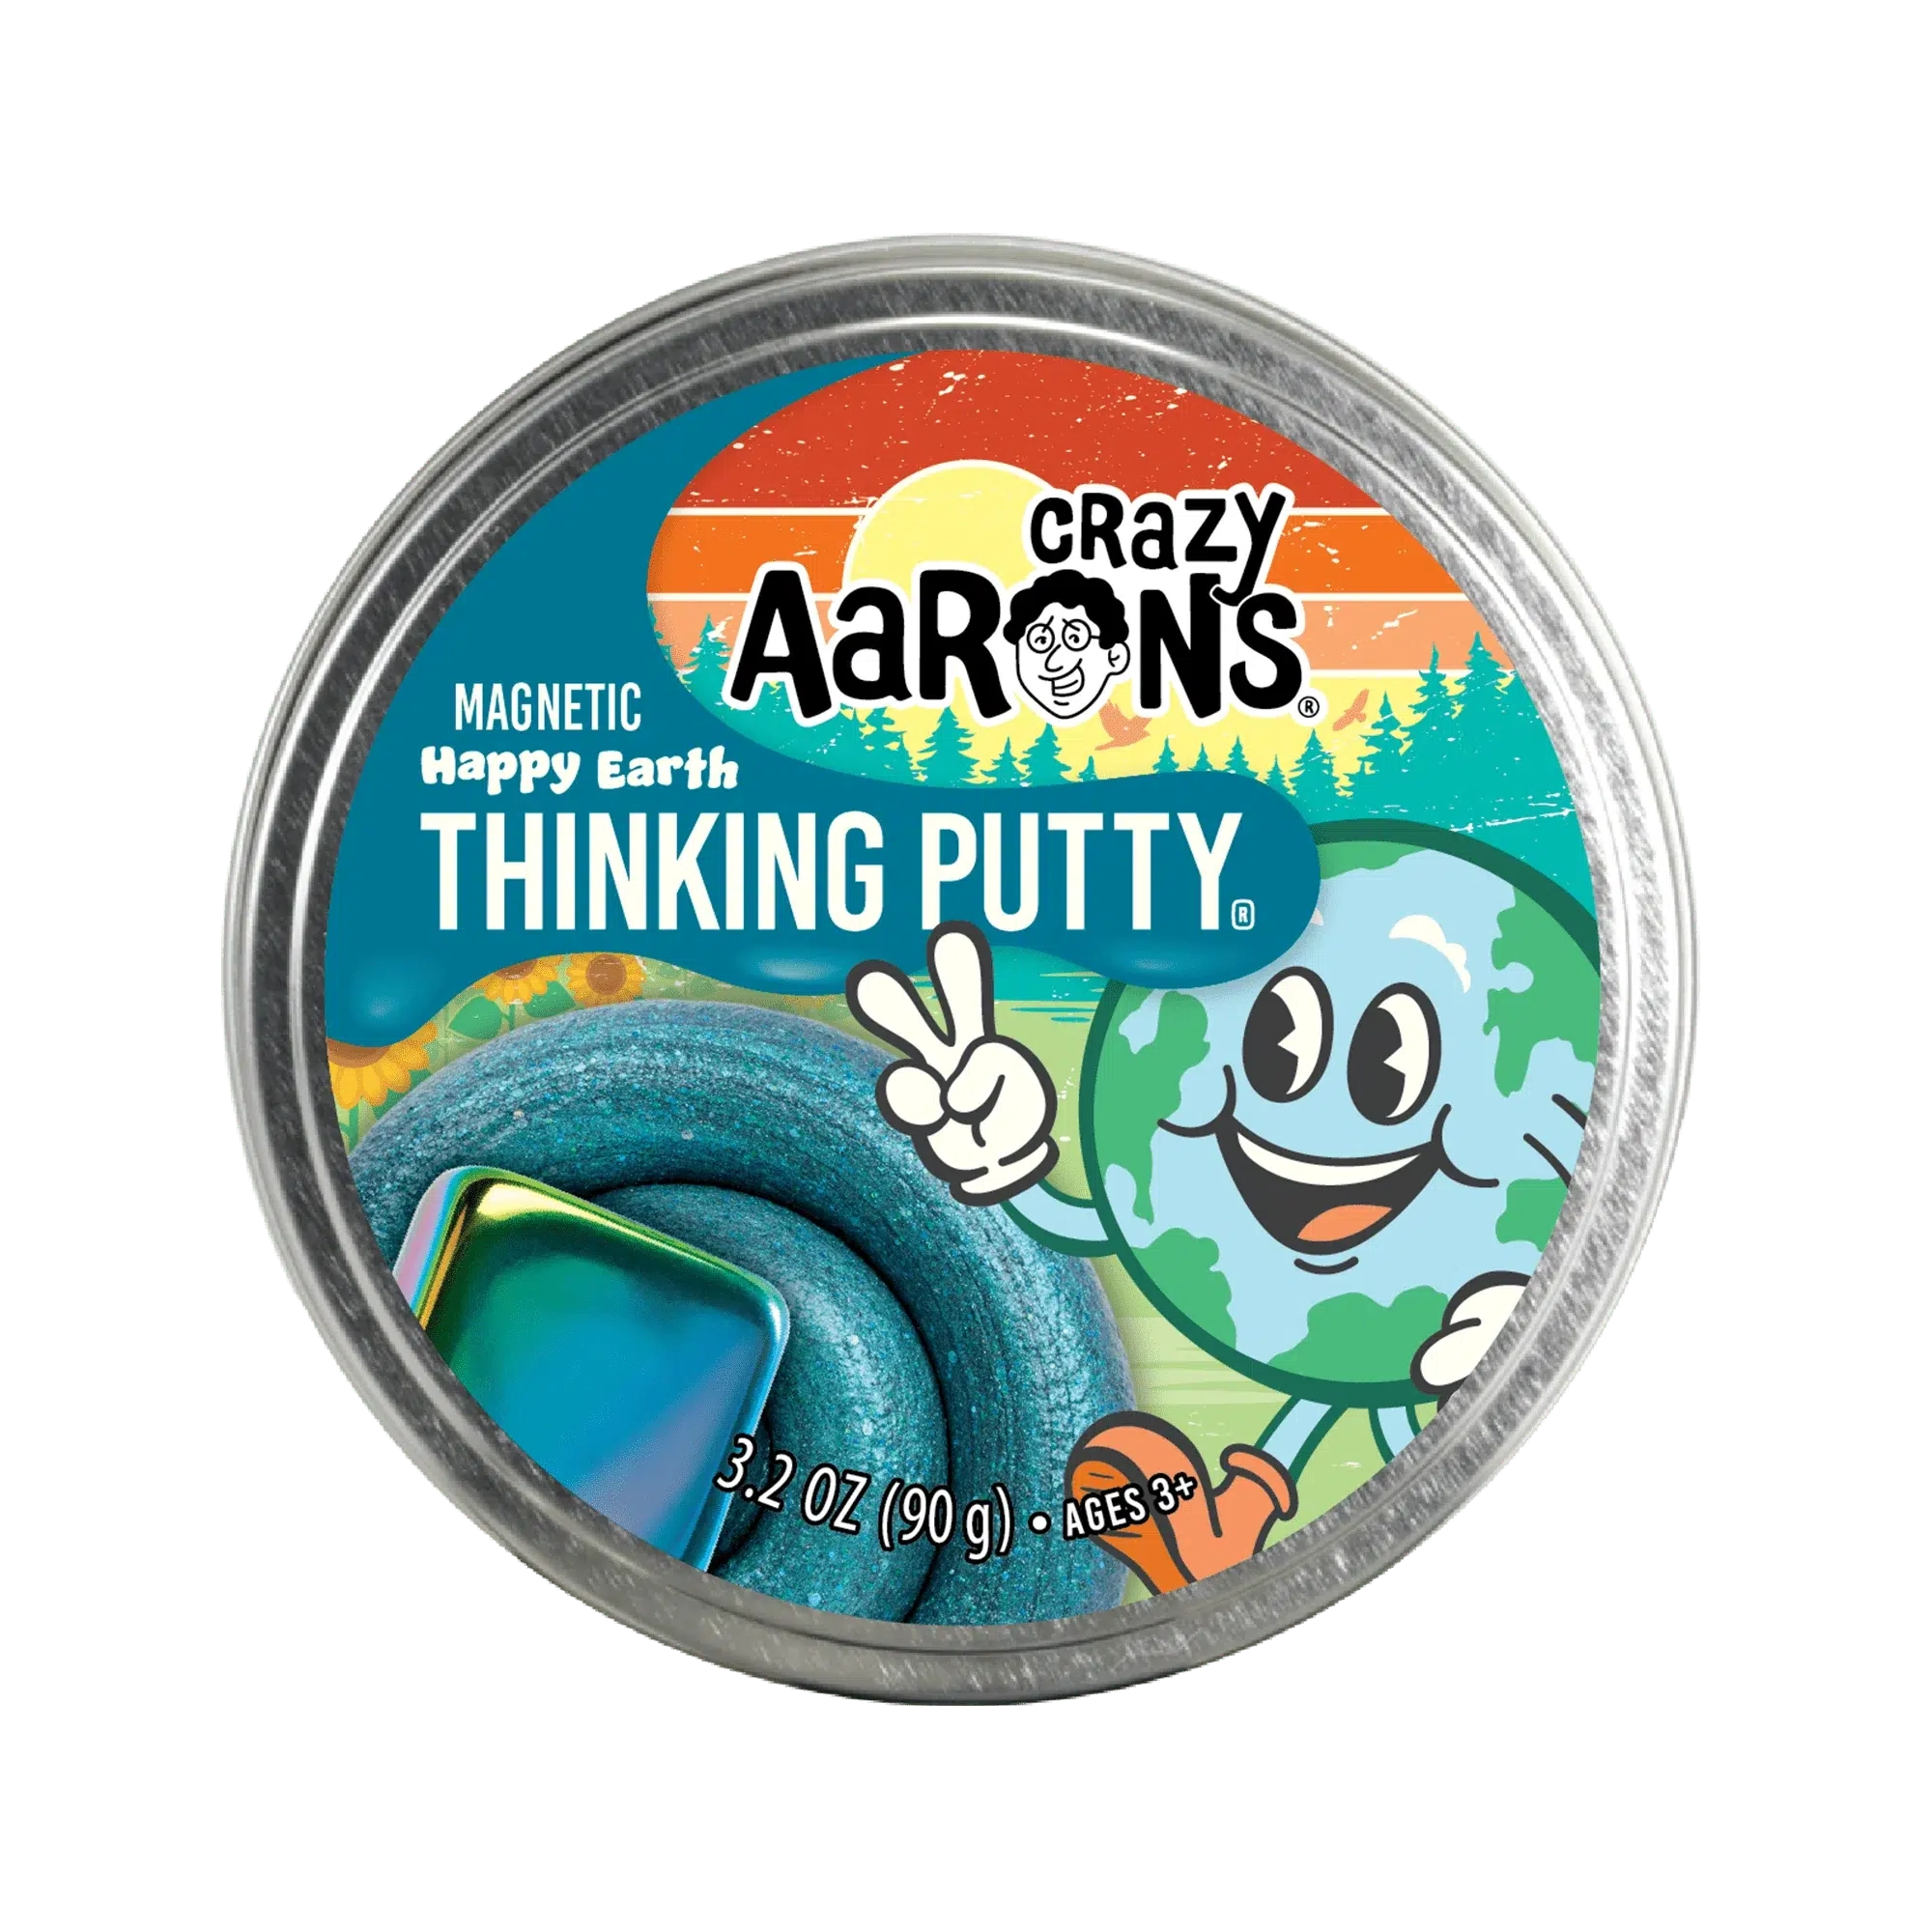 Crazy Aaron's Putty - Magnetic Thinking Putty - Happy Earth - 4 inch Tin-Novelty-Yellow Springs Toy Company